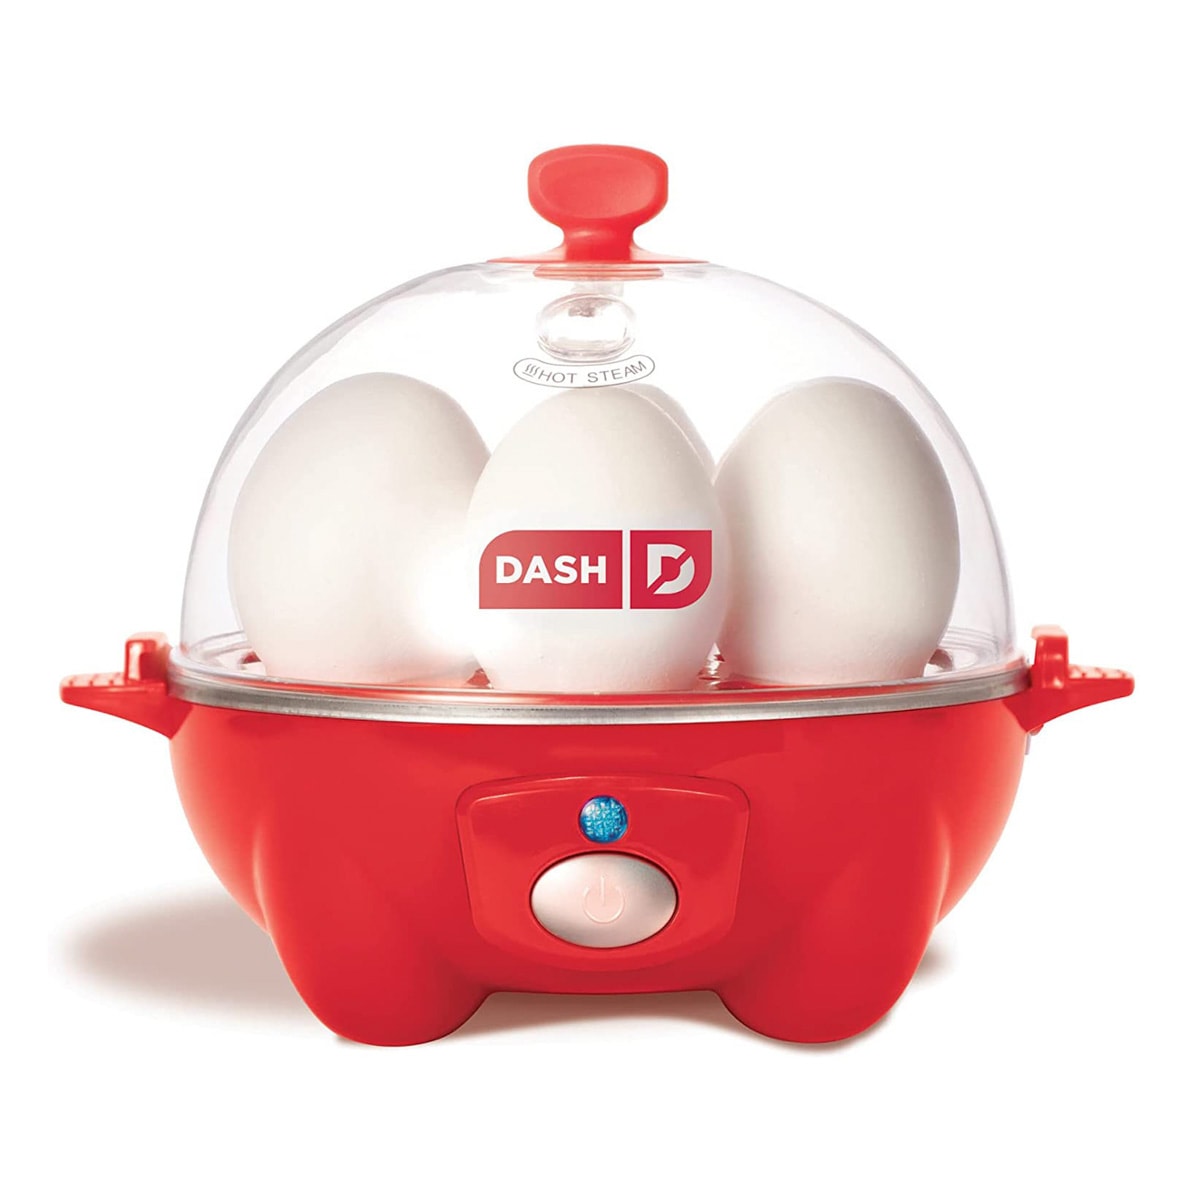 DASH rapid egg cooker with eggs inside.